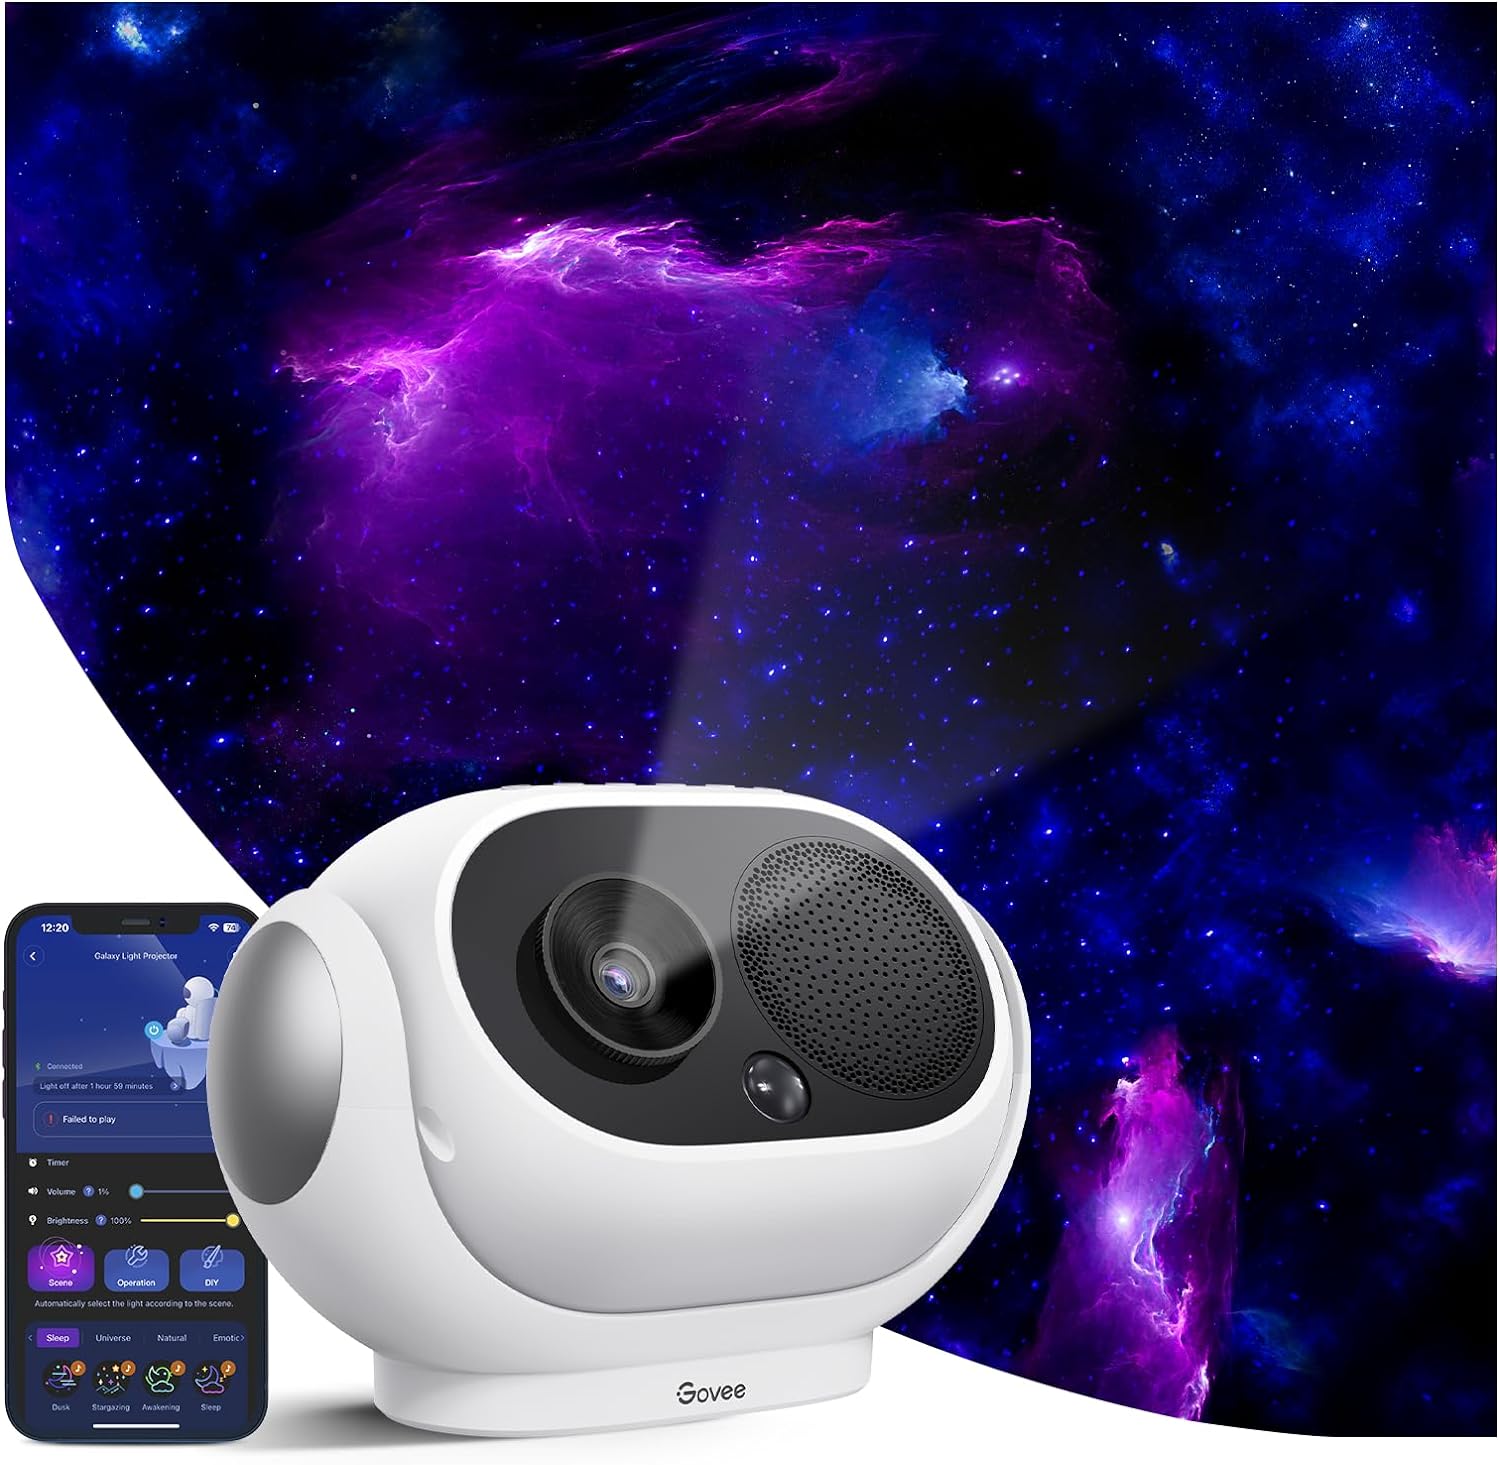 Govee Star Projector with Bluetooth Speaker